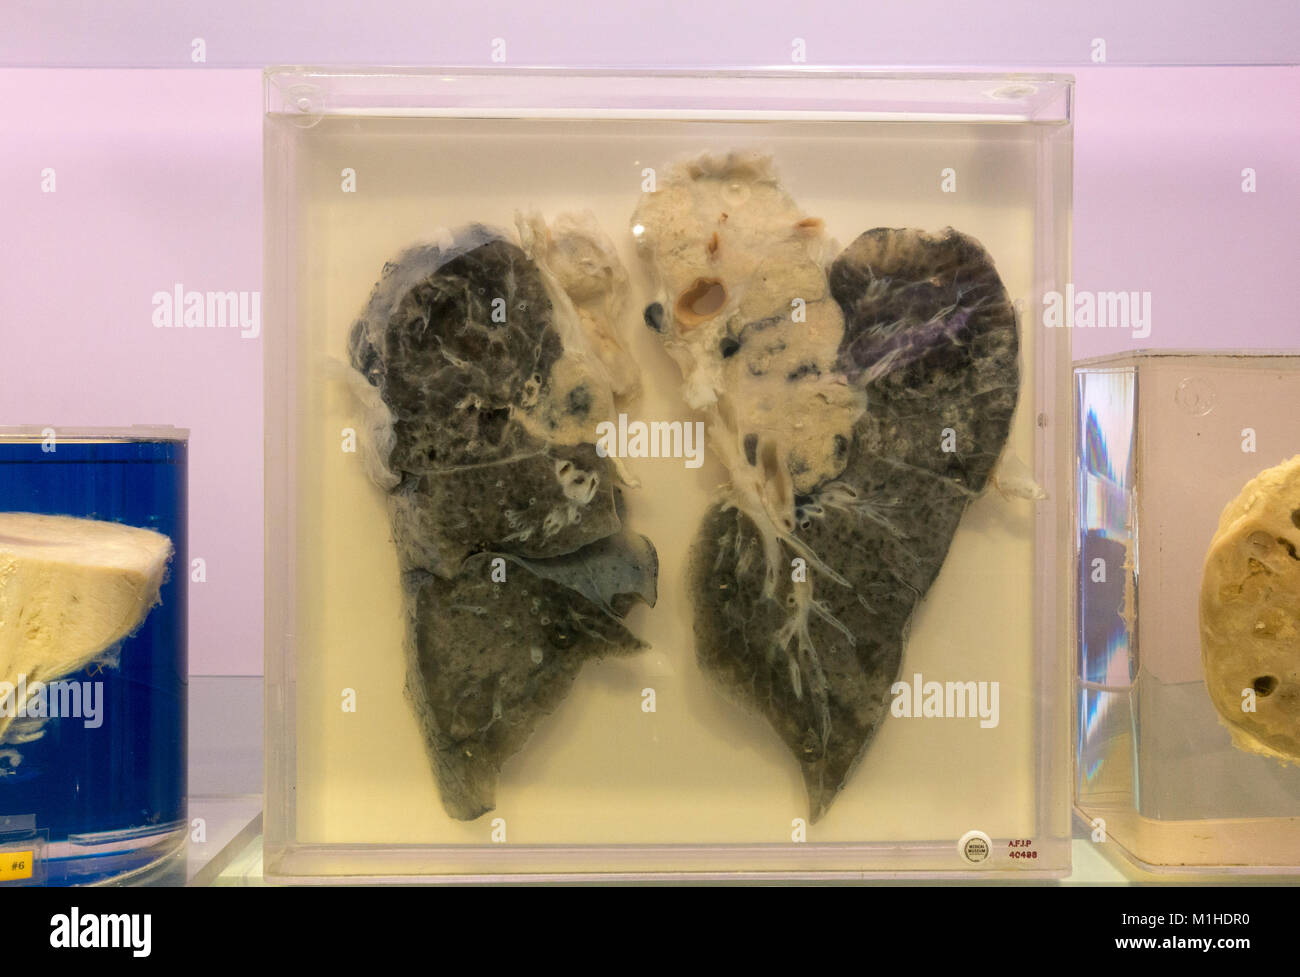 A smokers lungs with carcinoma (cancer) on display in the National Museum of Health and Medicine, Silver Spring, MD, USA. Stock Photo